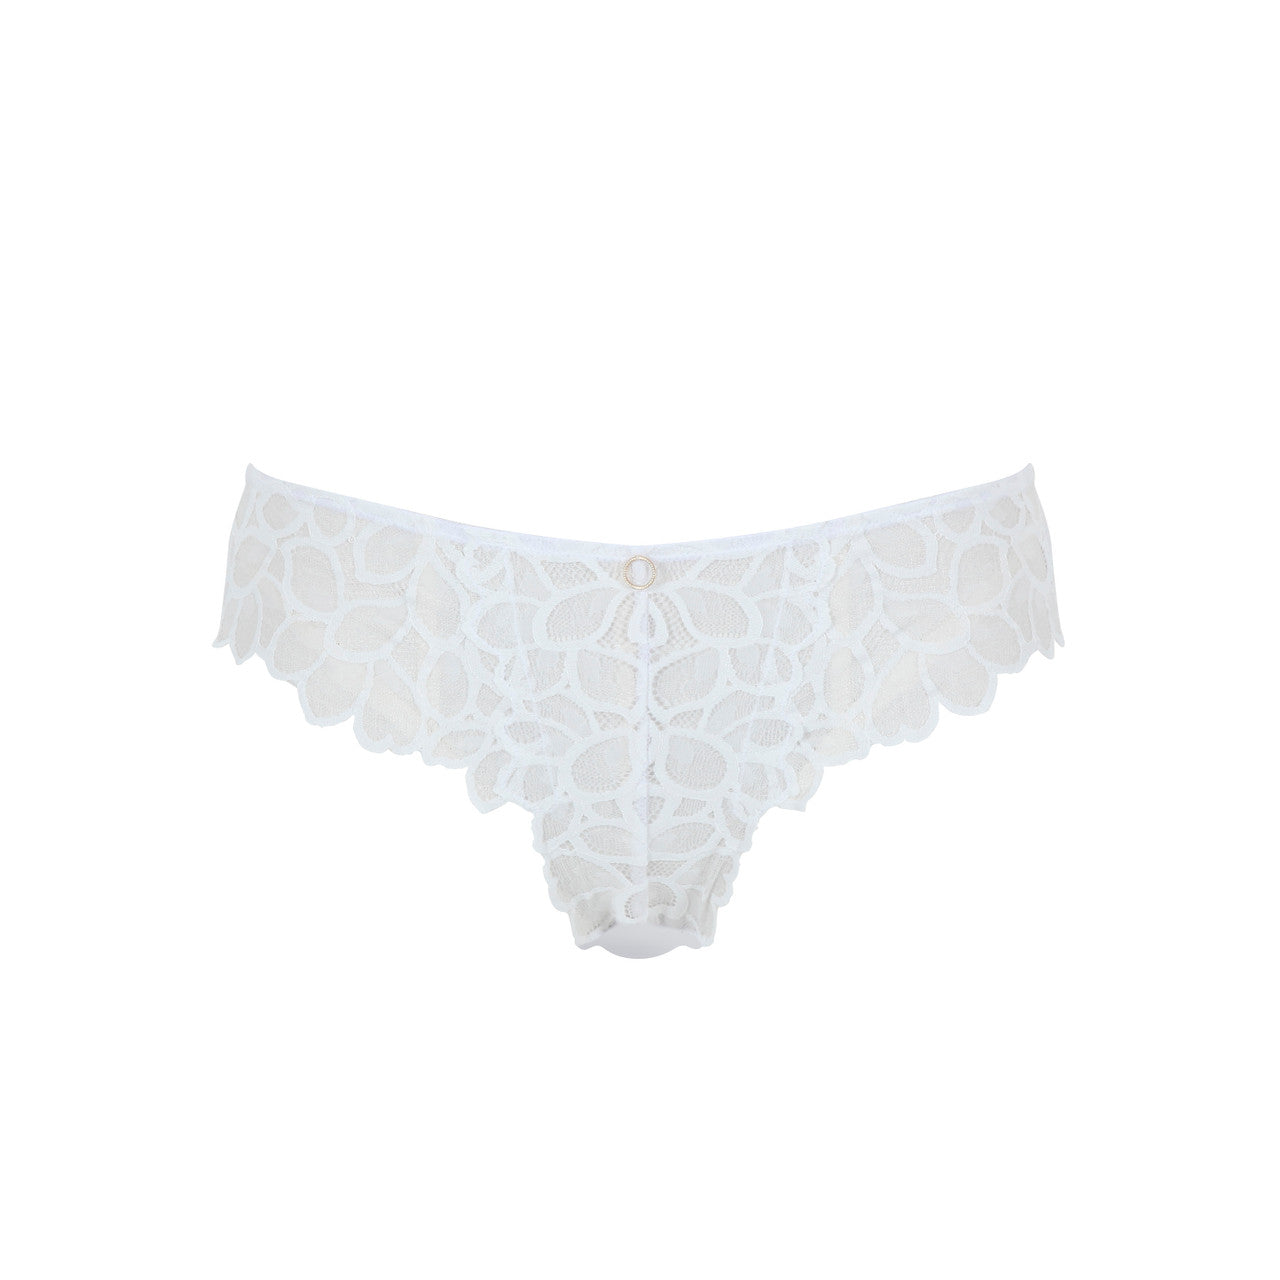 Product photo of Panache Allure brief in ivory.